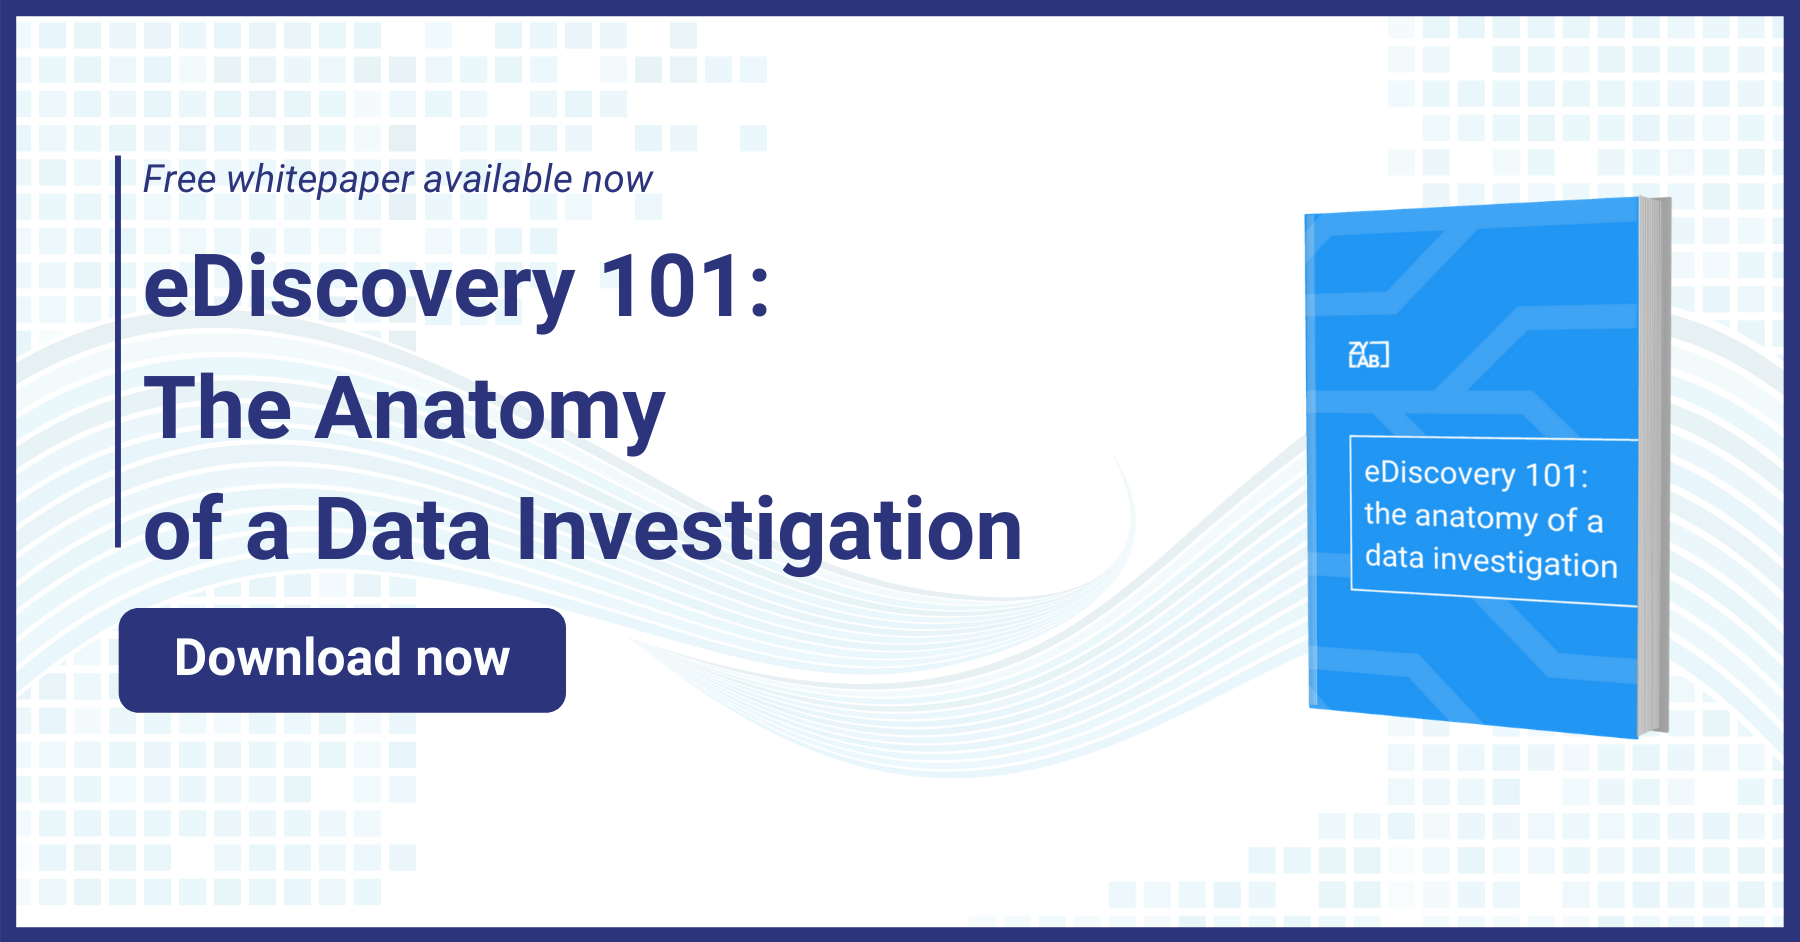 eDiscovery 101 - Data Investigations